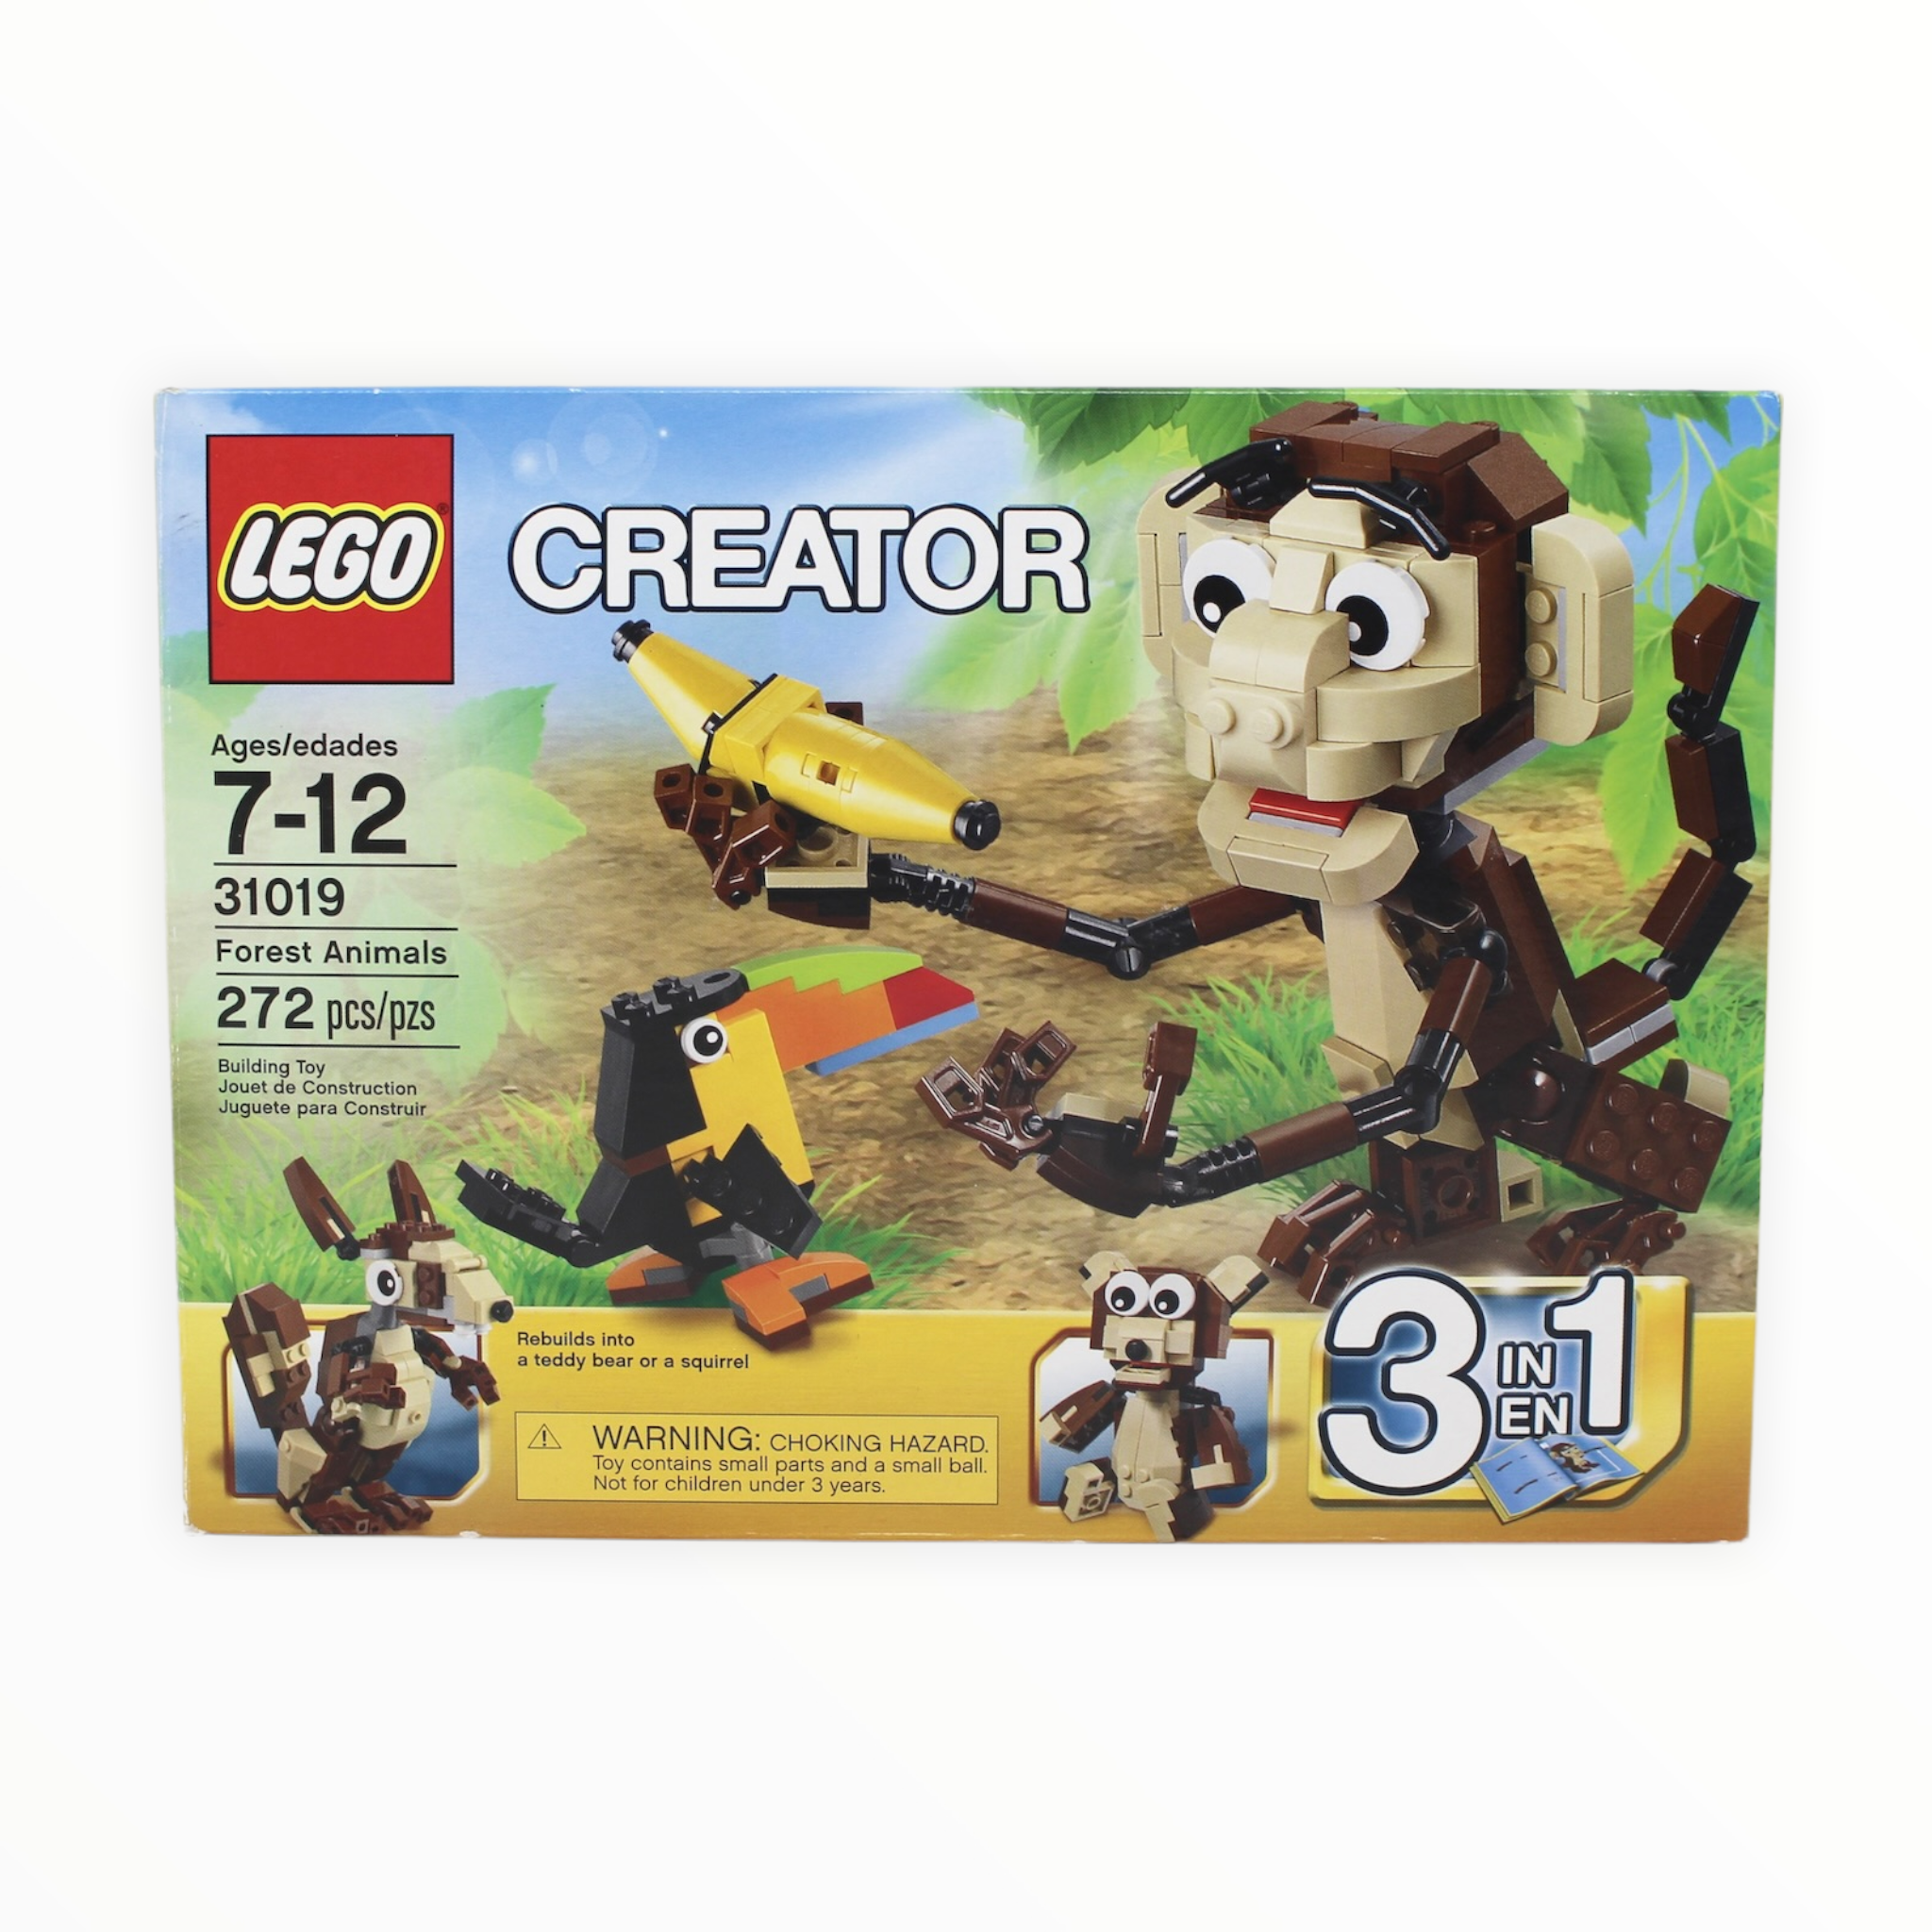 Certified Used Set 31019 Creator Forest Animals